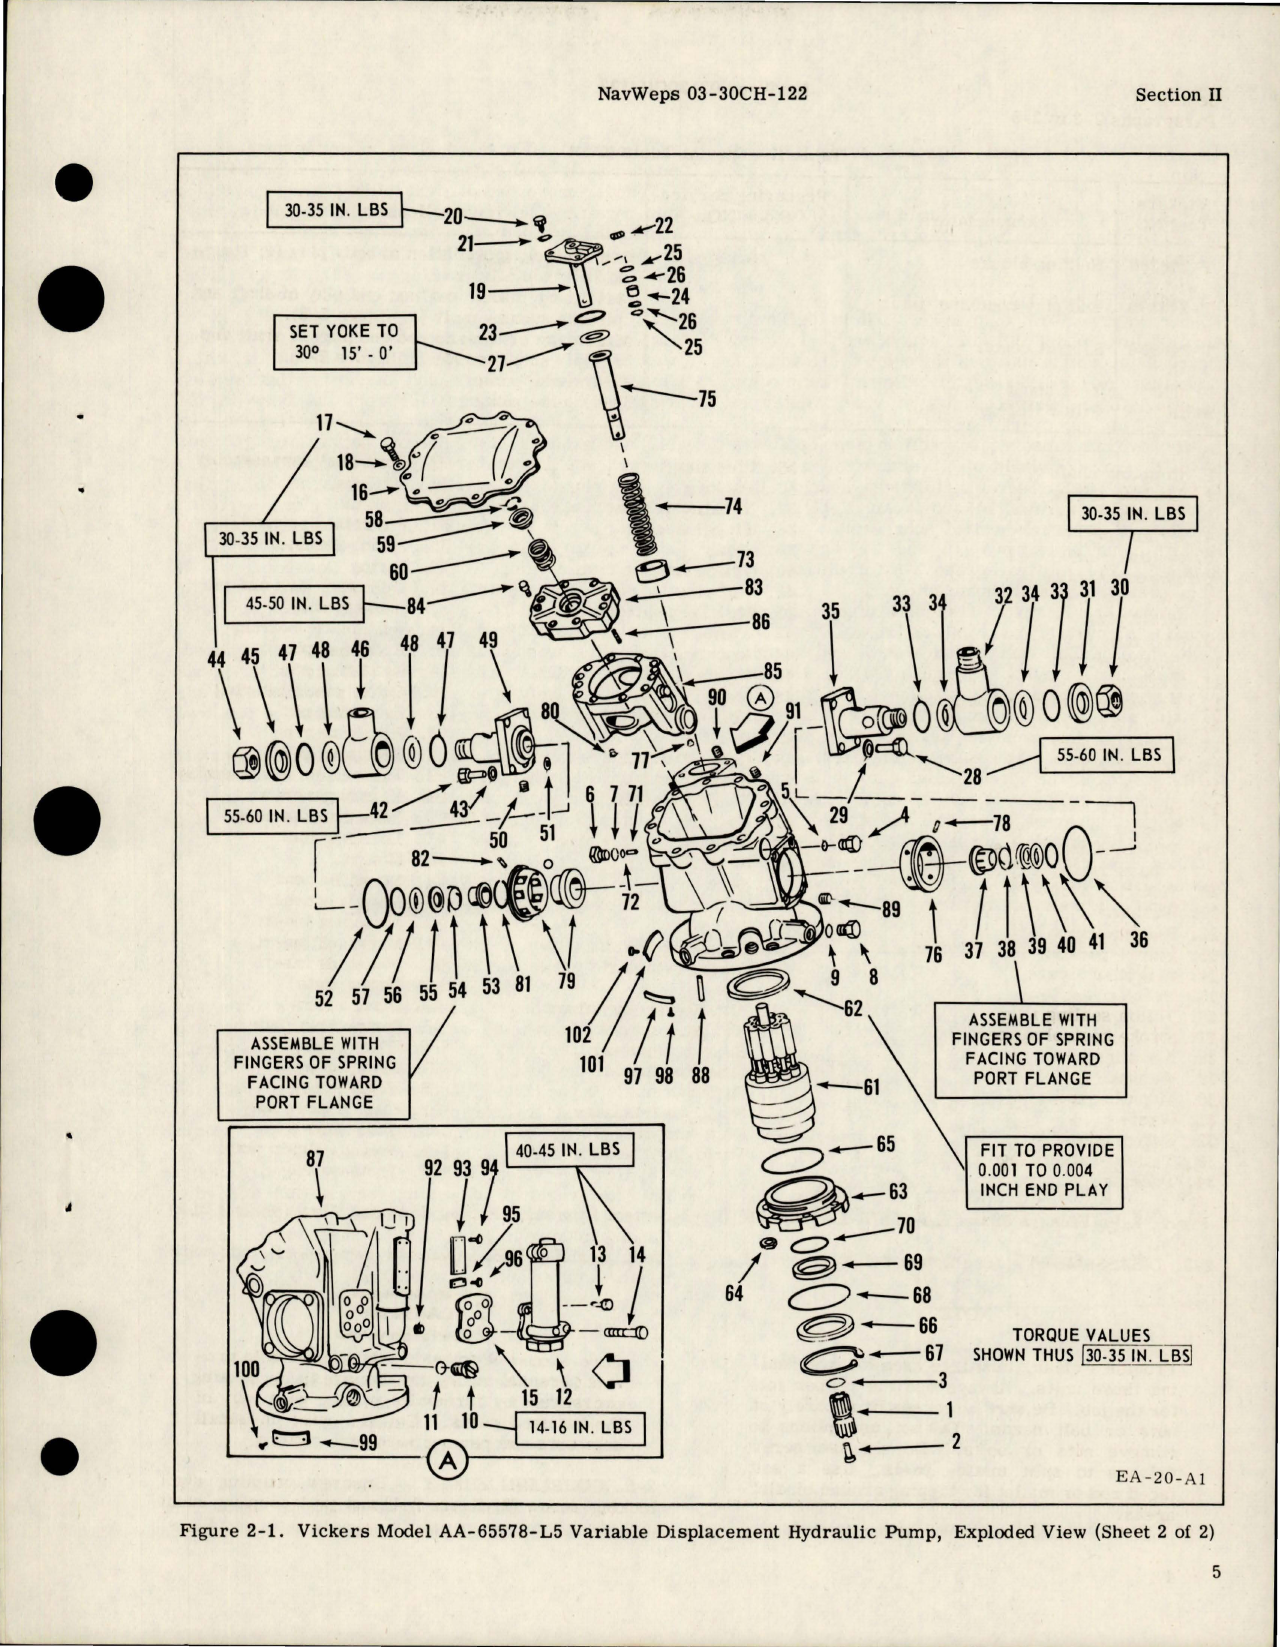 Sample page 9 from AirCorps Library document: Overhaul Instructions for Variable Displacement Hydraulic Pump Assembly - Model AA-65578-L5 